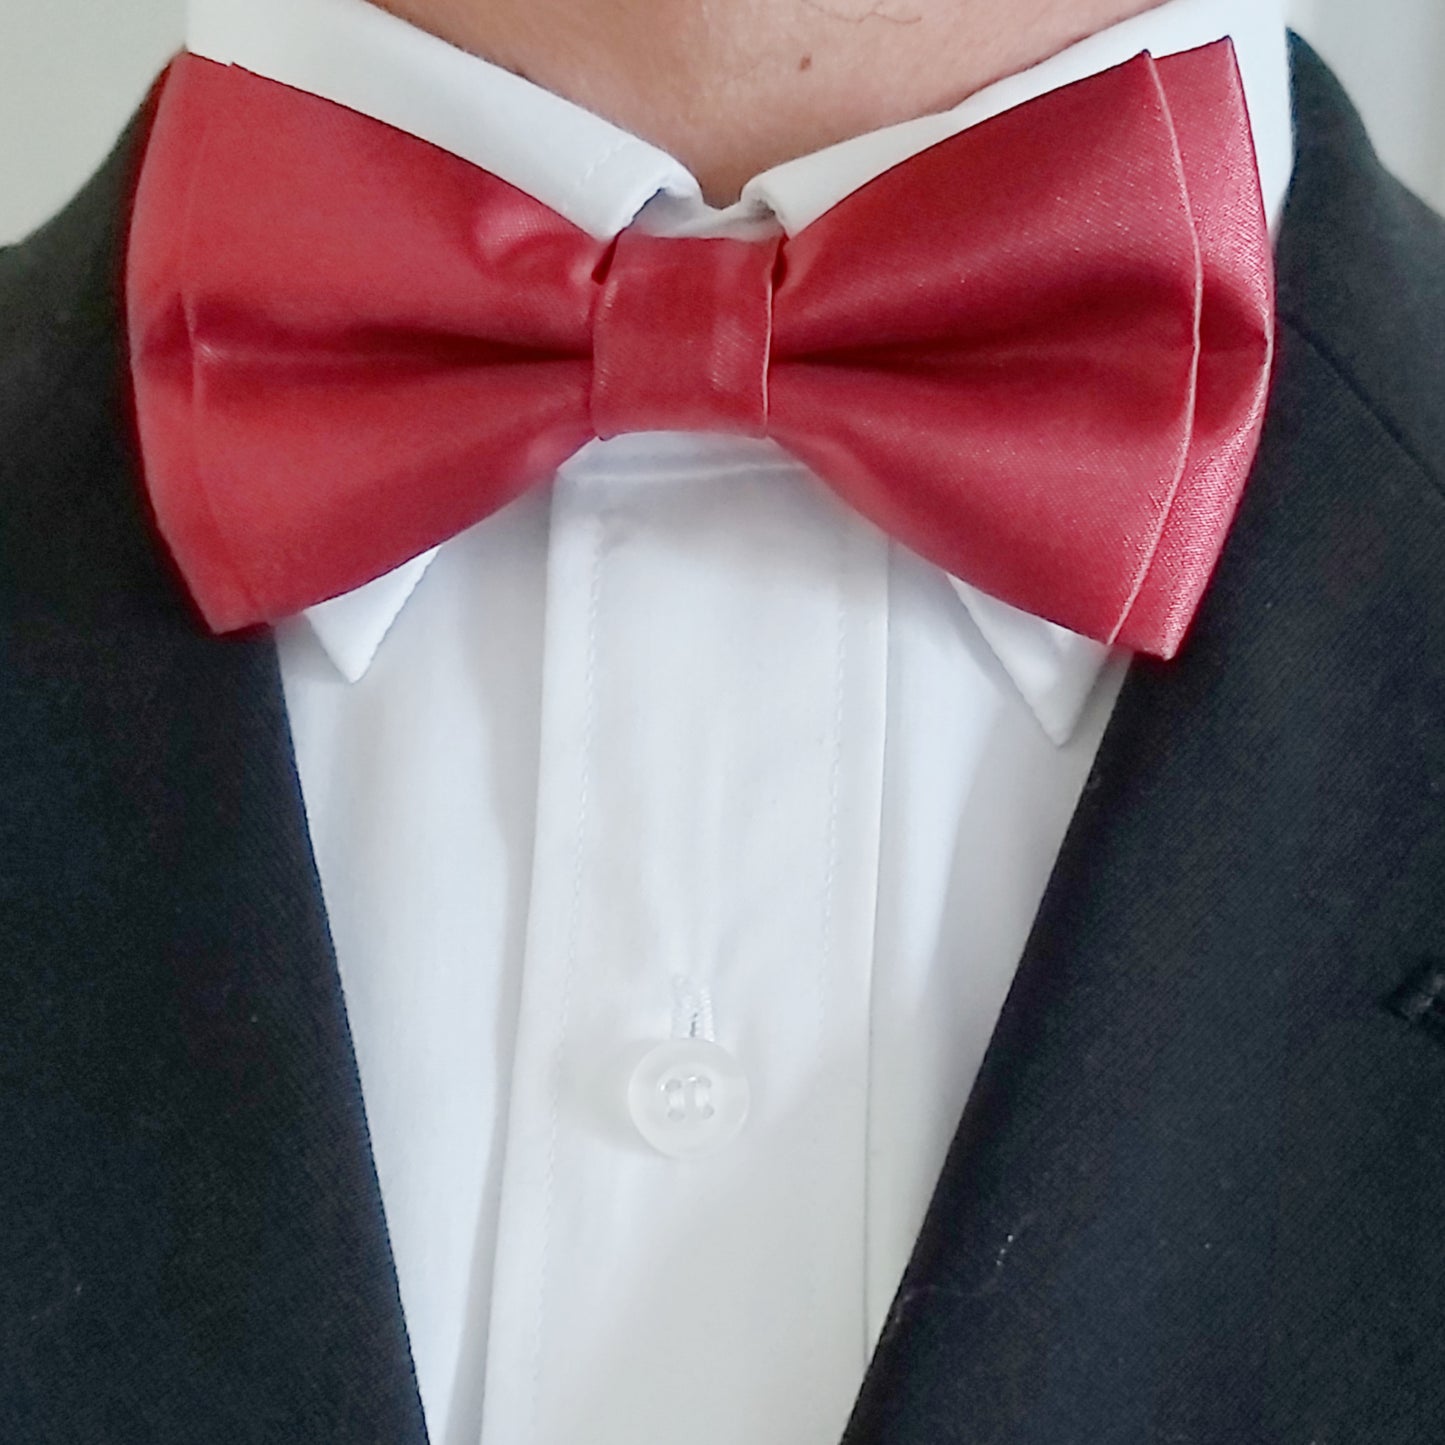 Bow Tie - Red